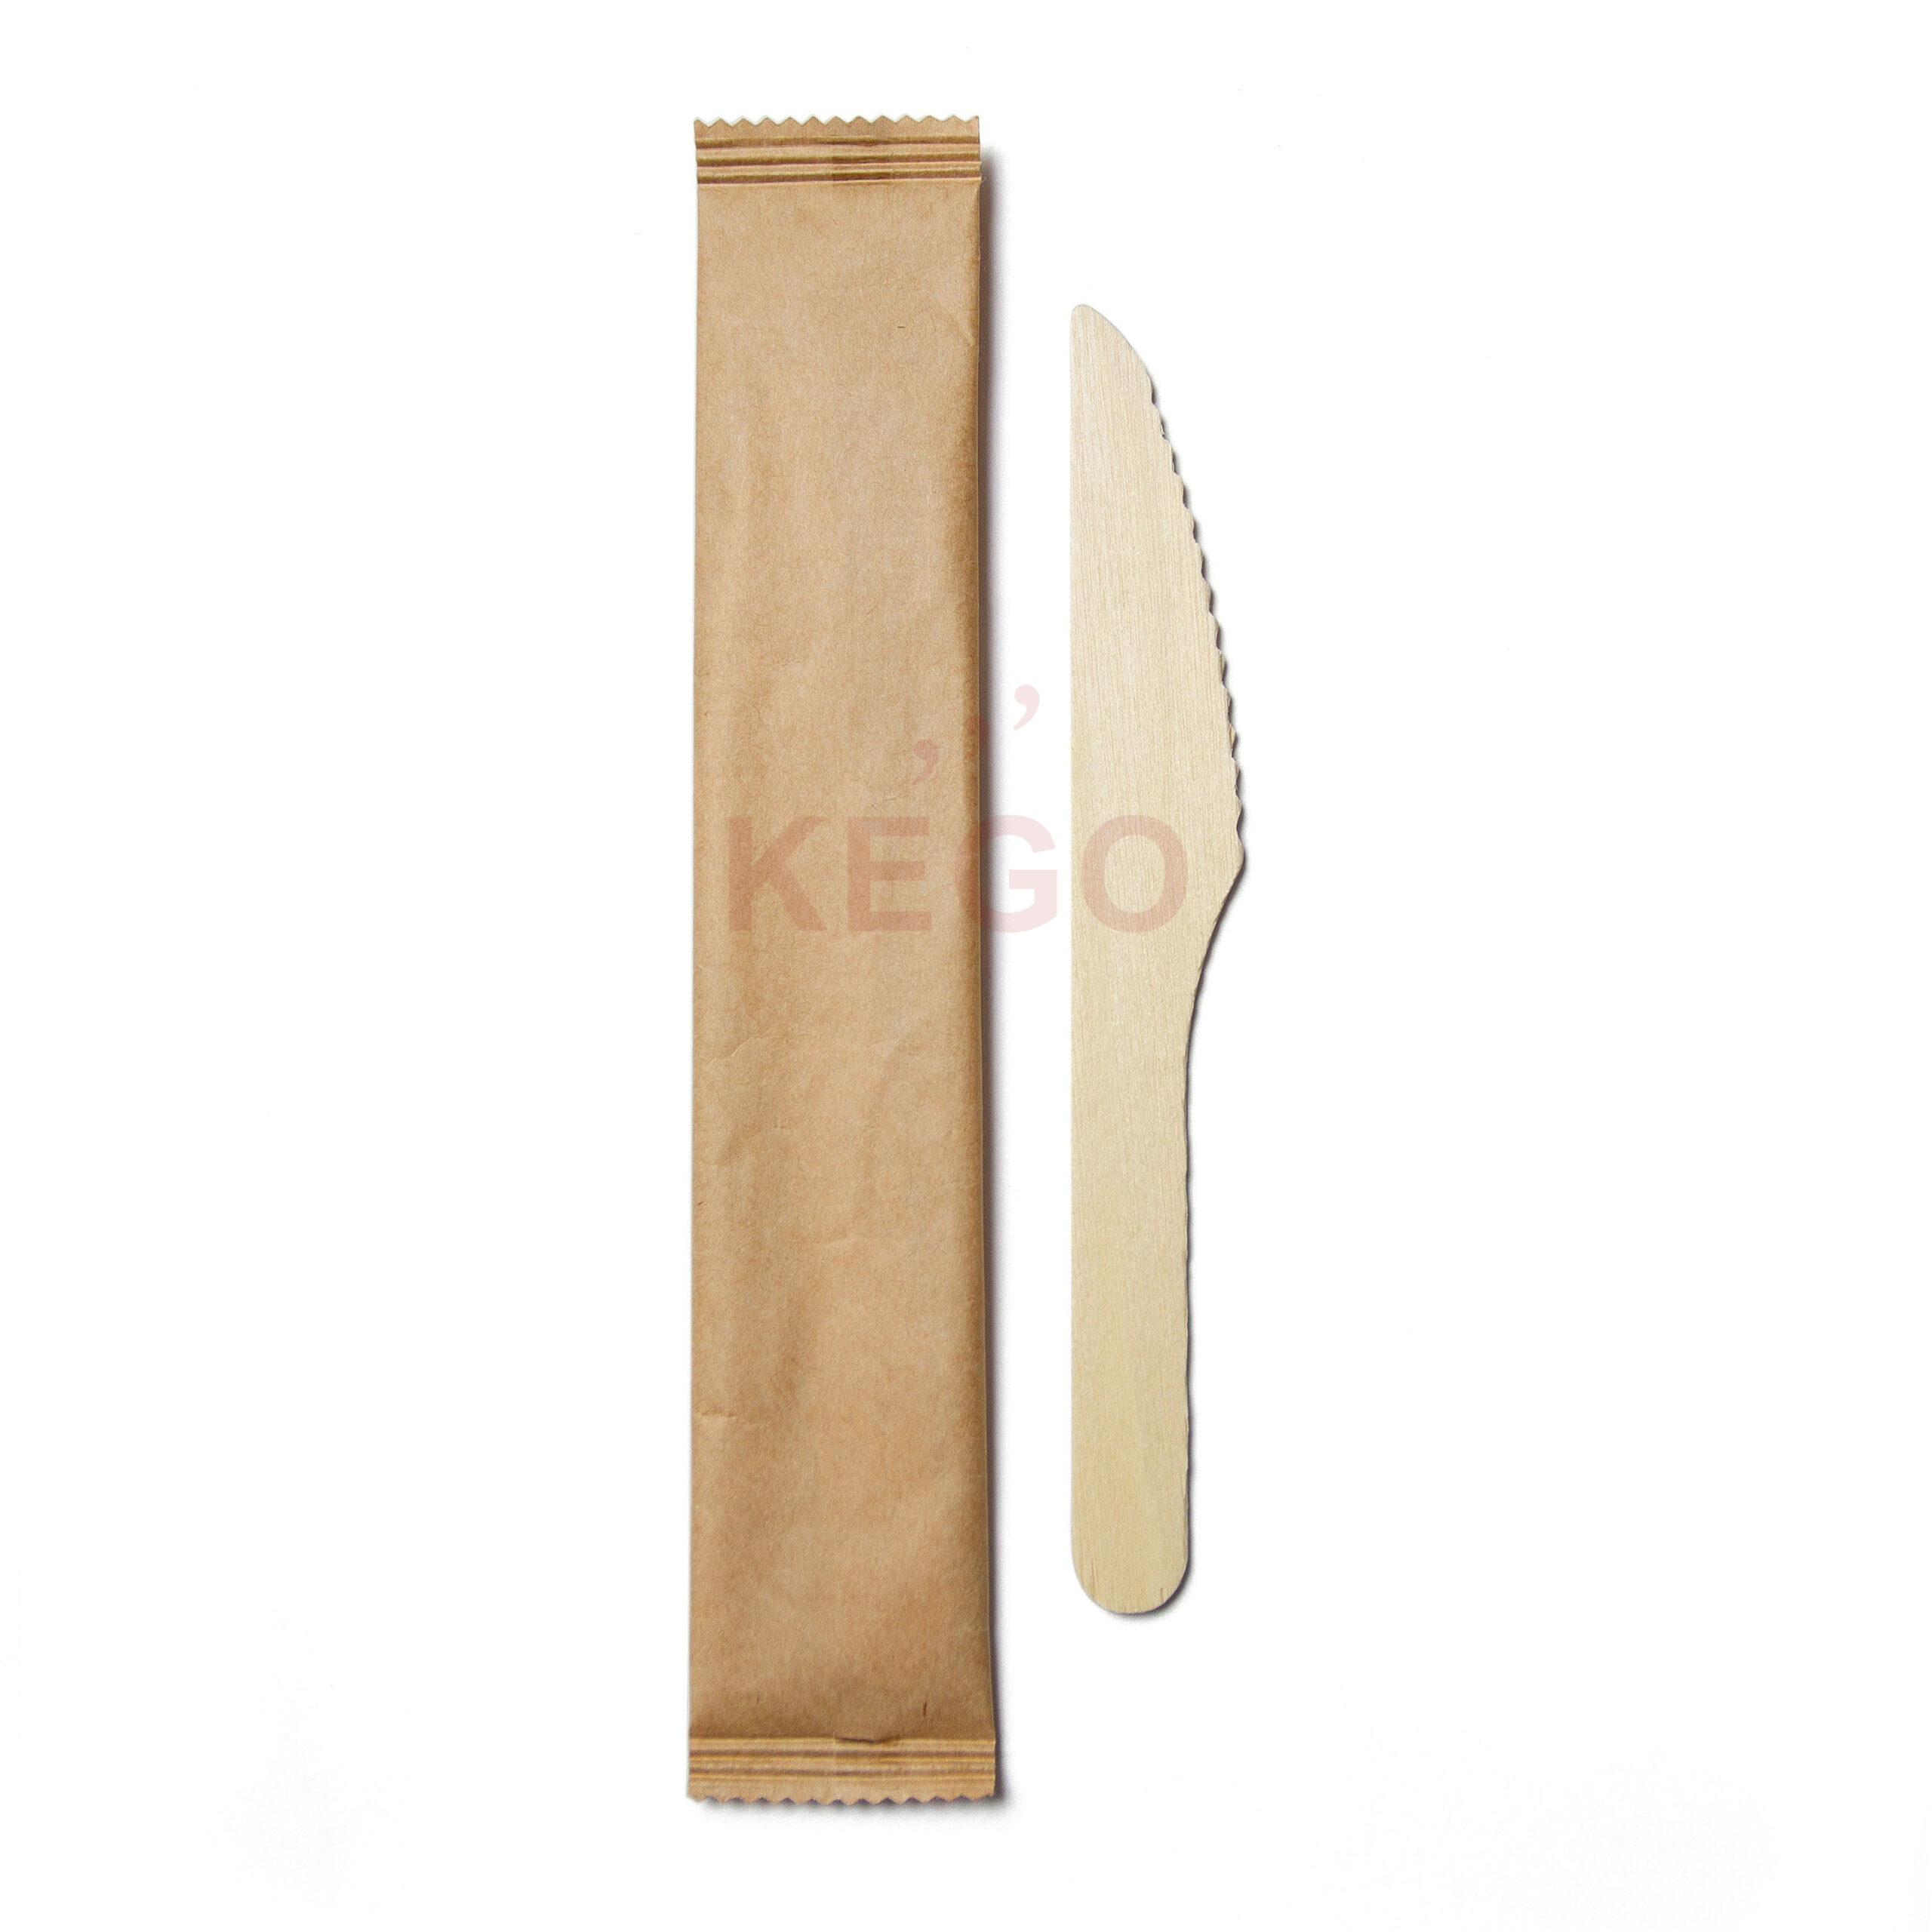 https://disposablewoodencutlery.com/wp-content/uploads/2015/09/Individual-Set-3-scaled.jpg